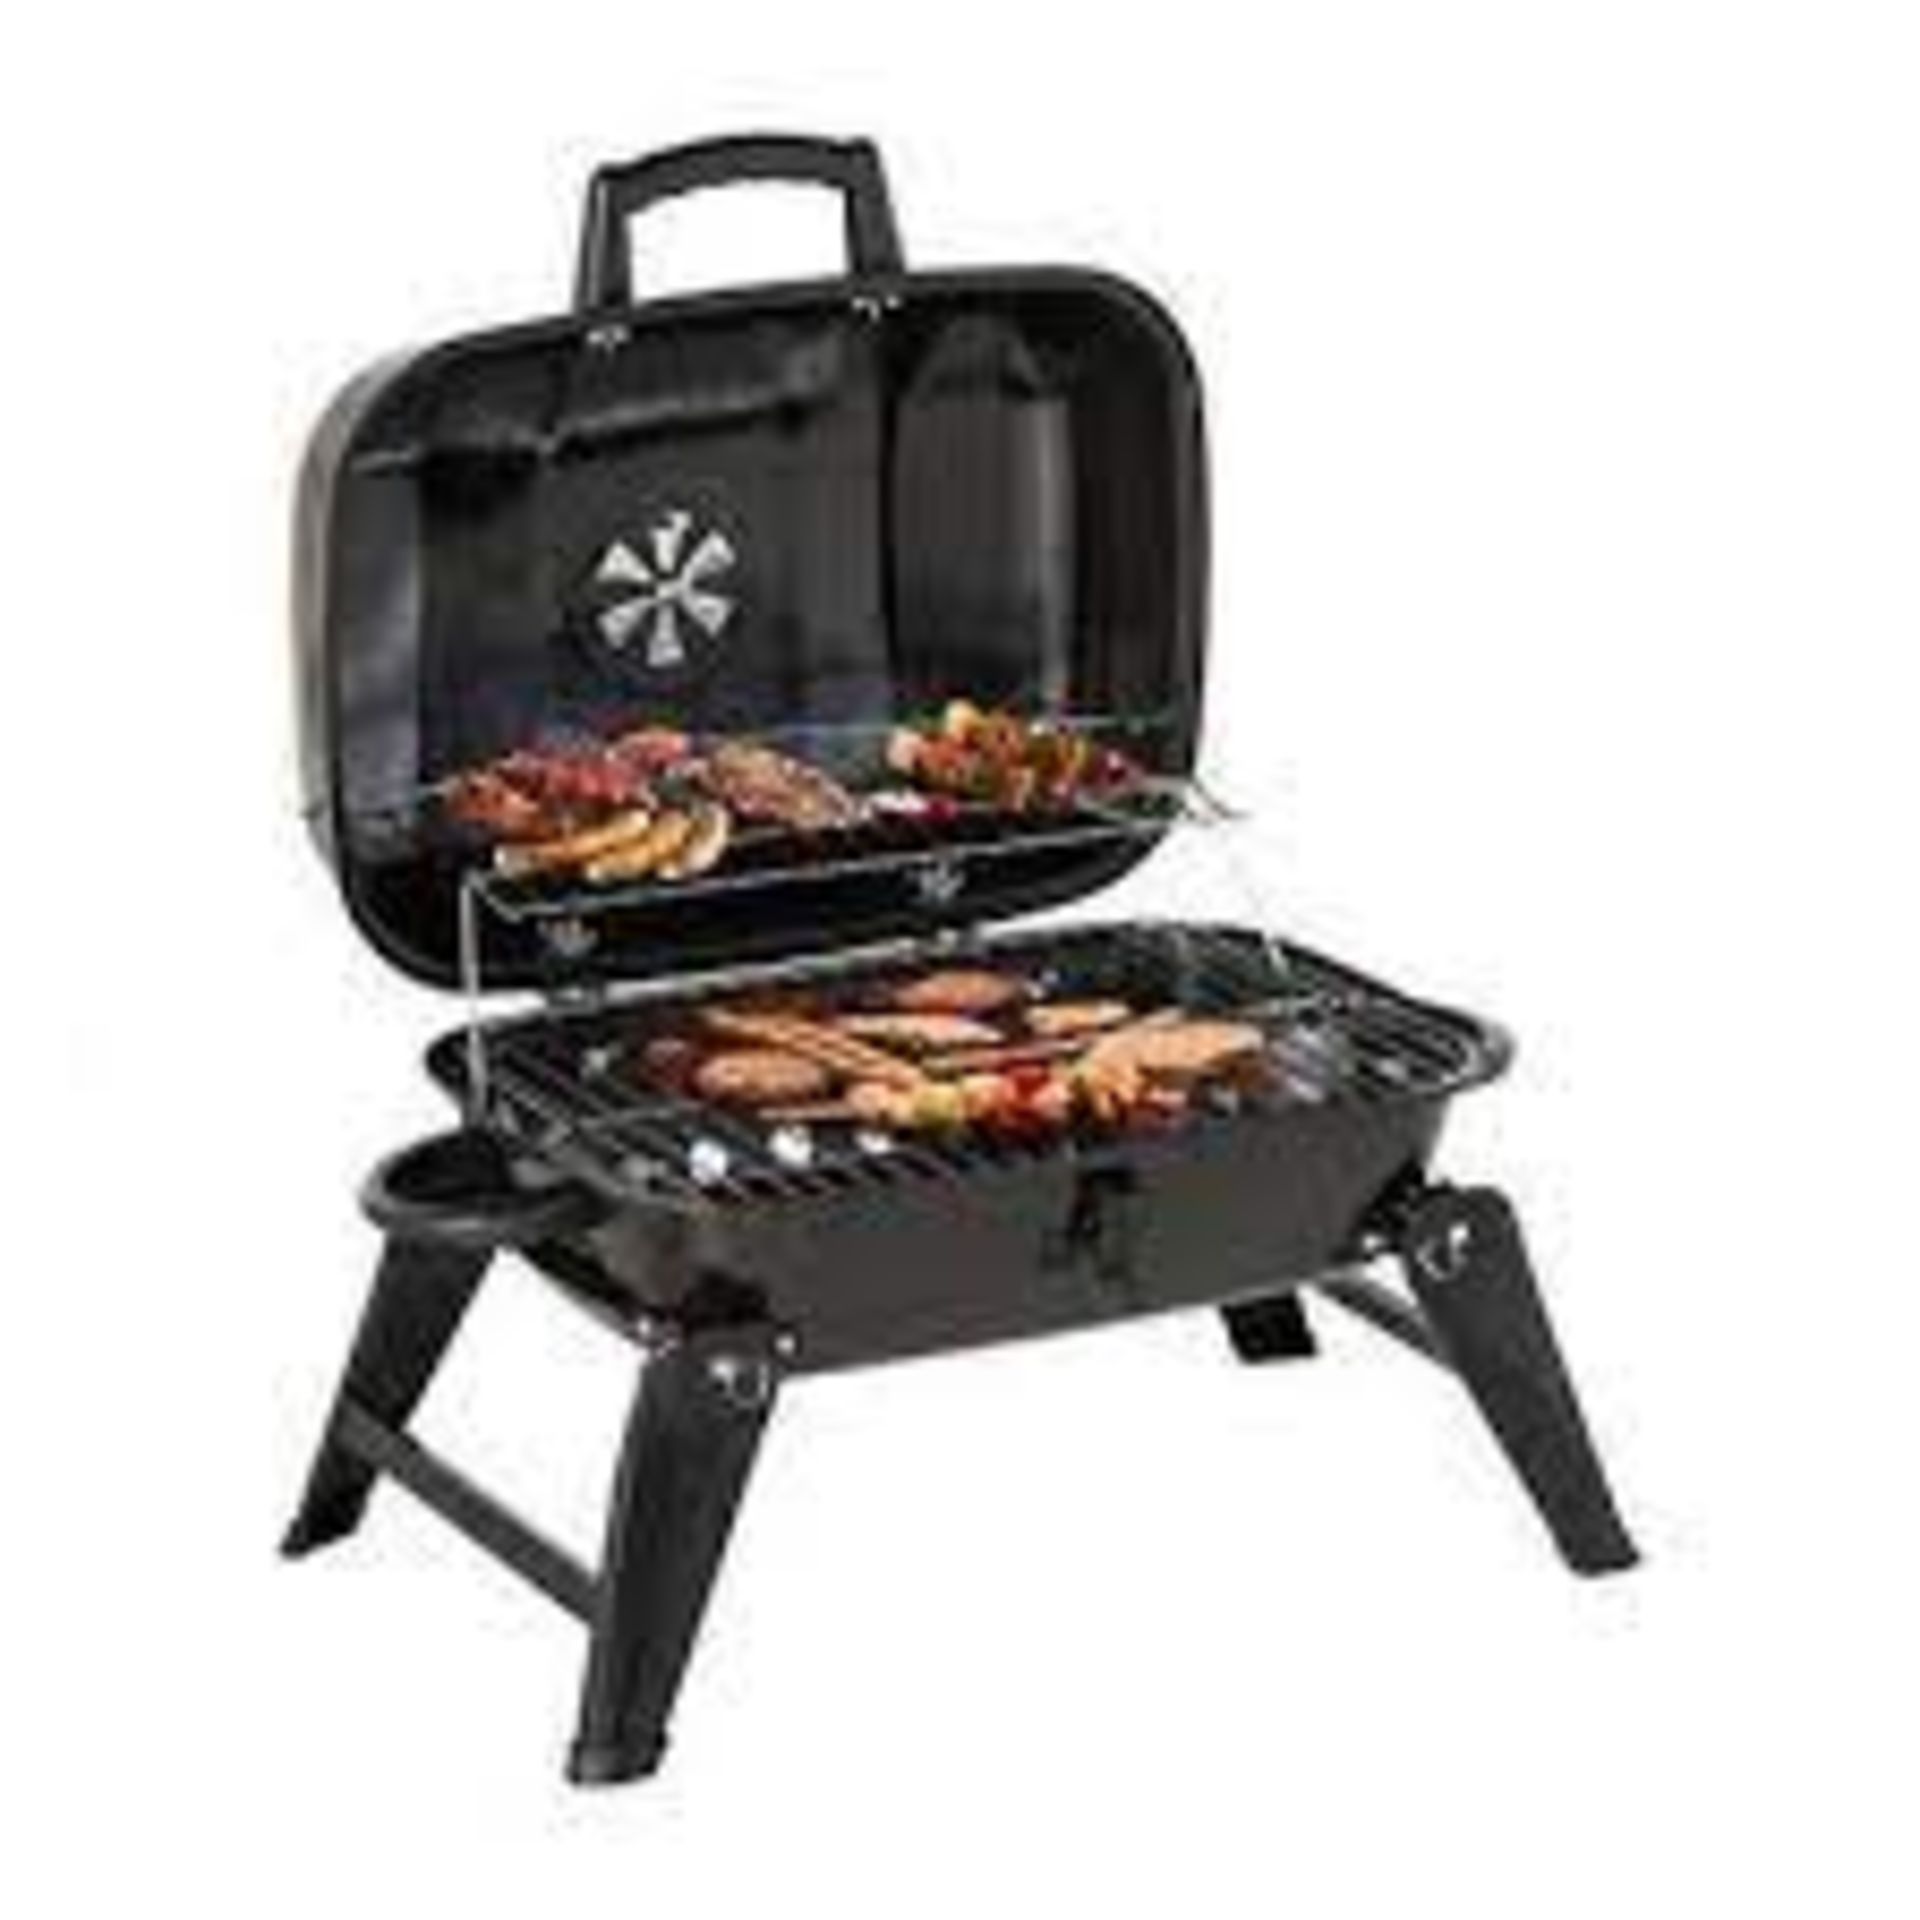 4'' Charcoal Barbecue Grill with Portable Anti-Scalding Handle Design, Portable Tabletop Folding